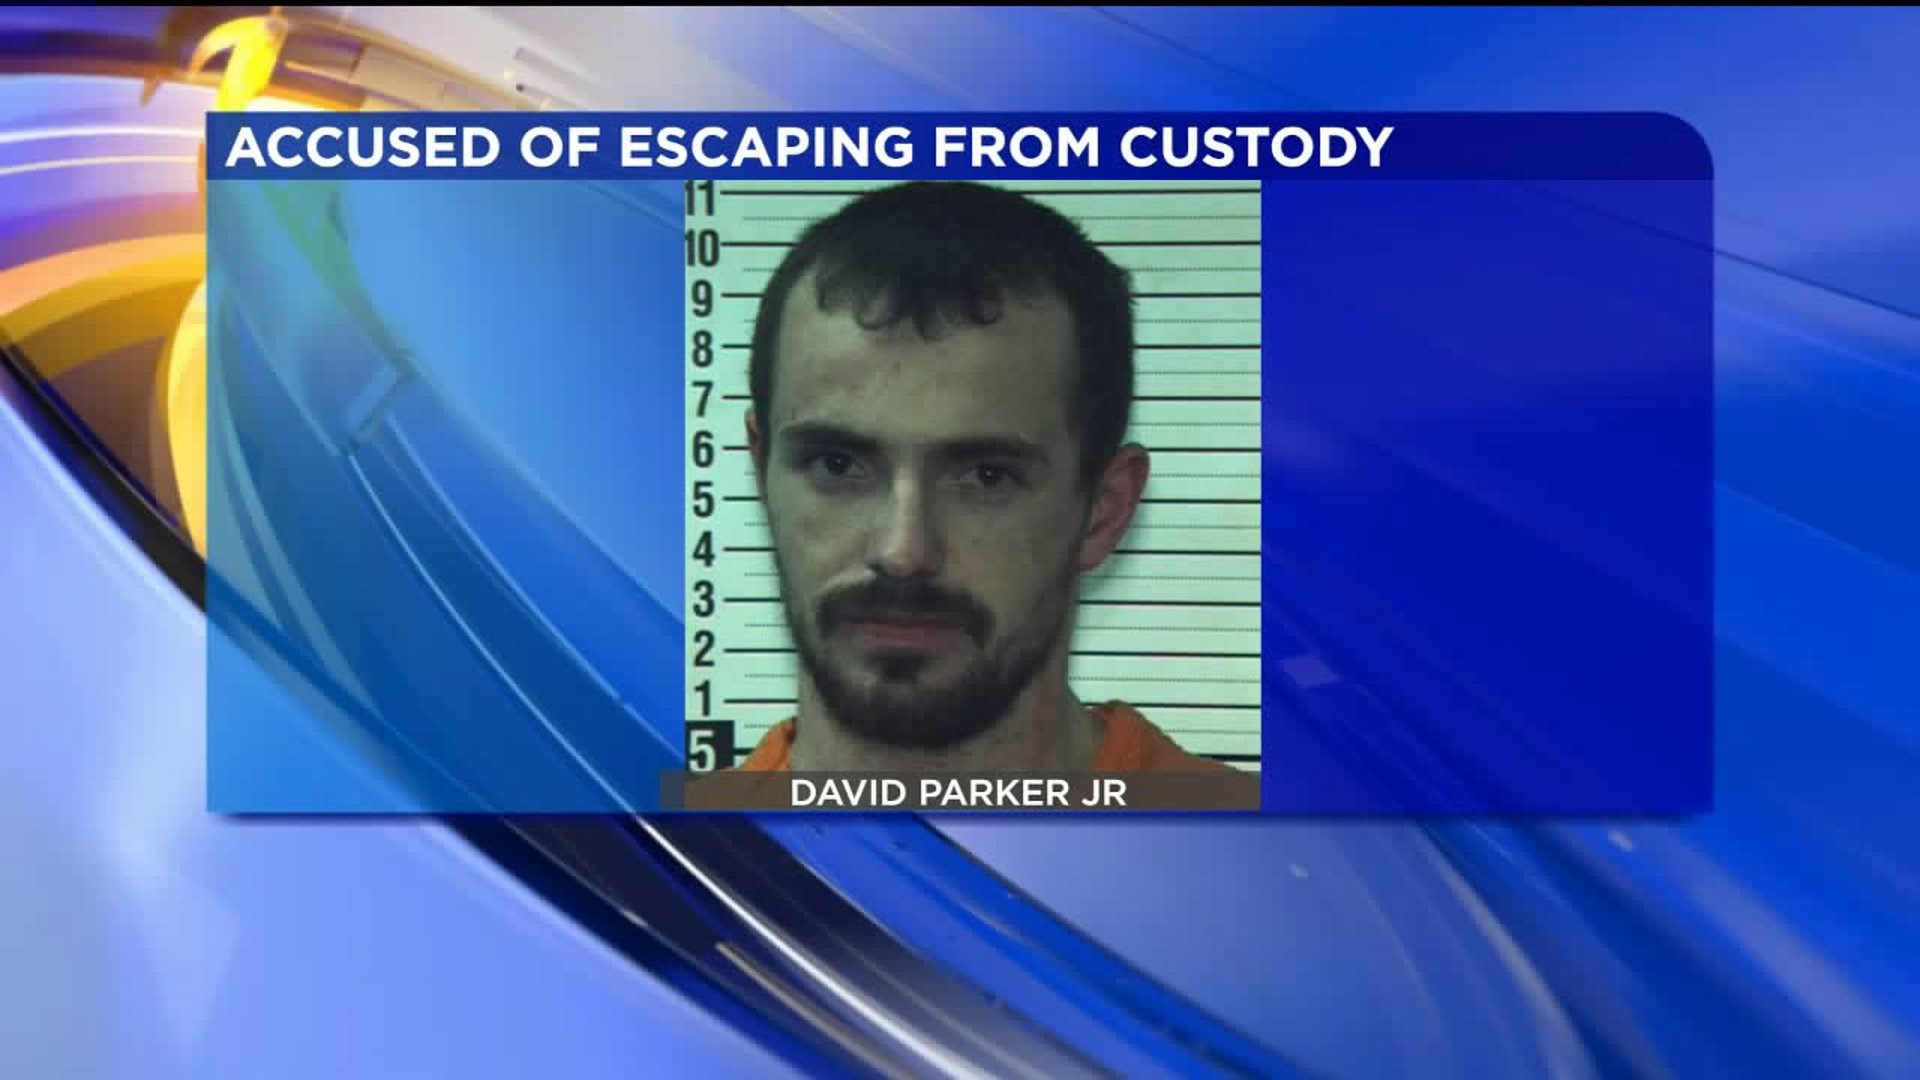 Deputy Injured After Defendant Tries to Escape Custody